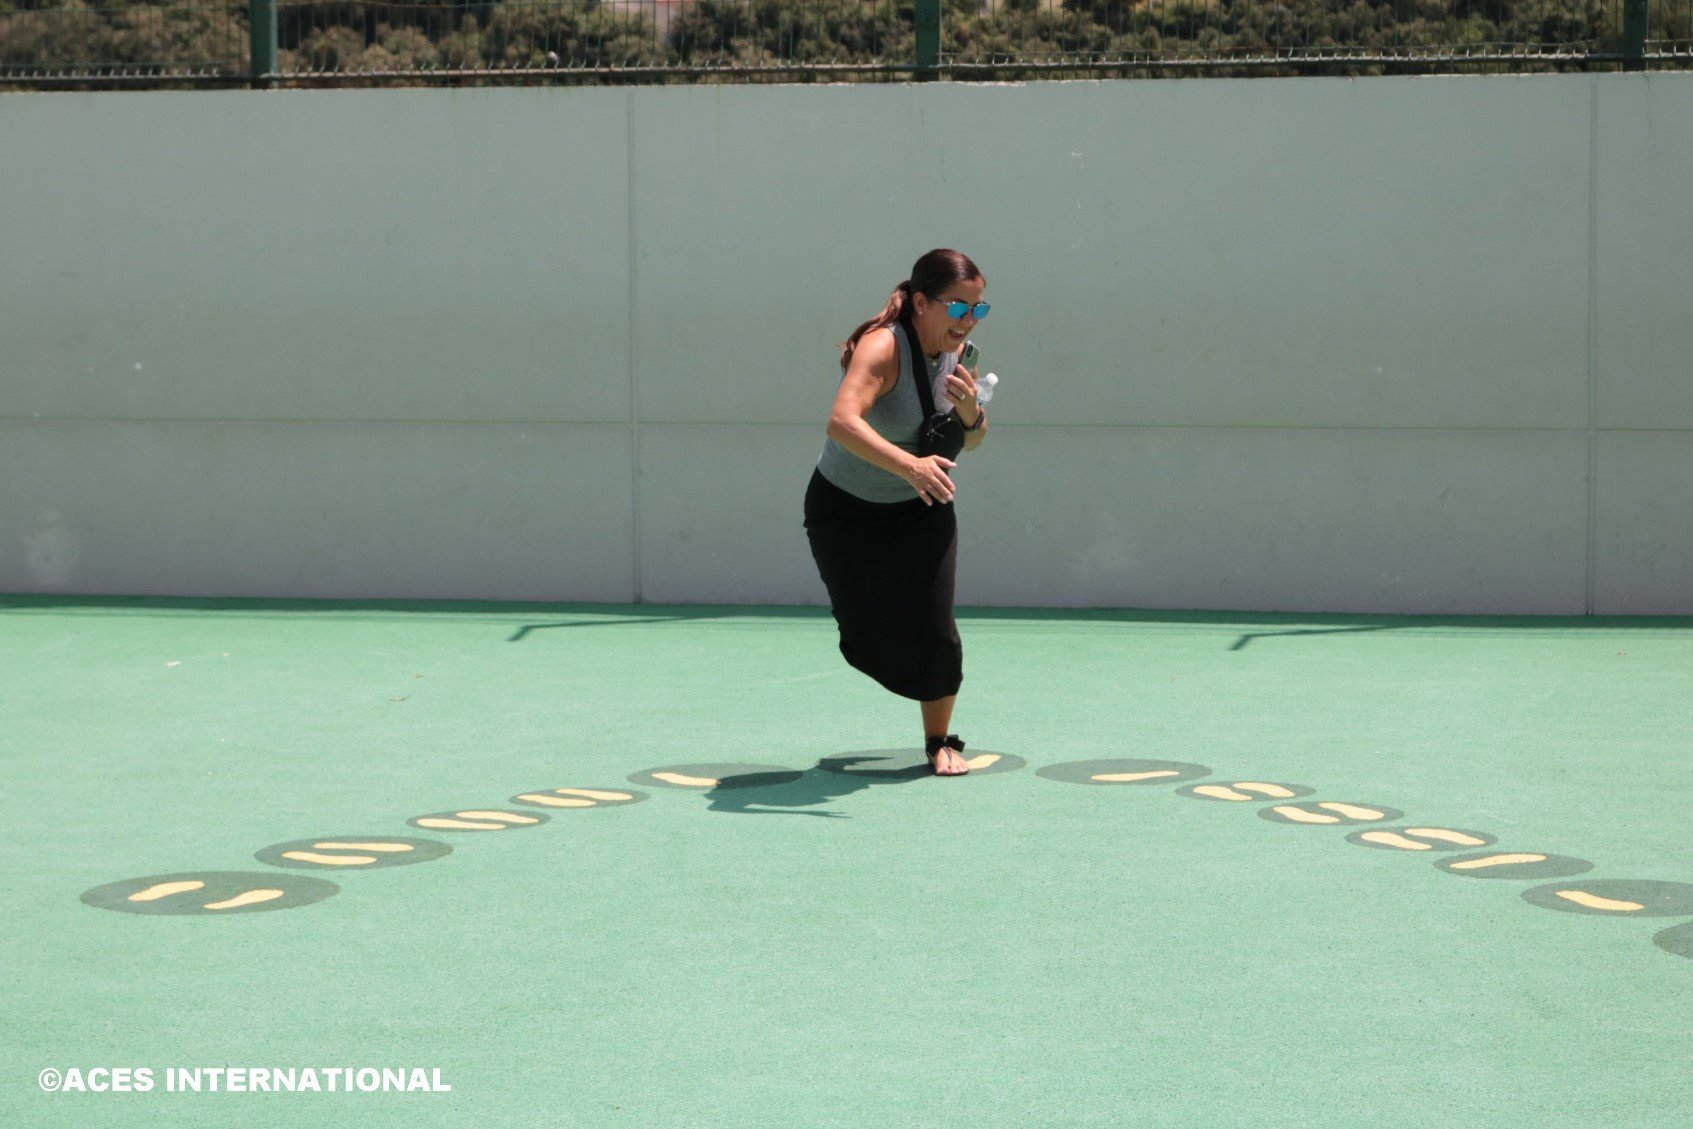 A group member from the Educators Field Study dances on footprint artwork.